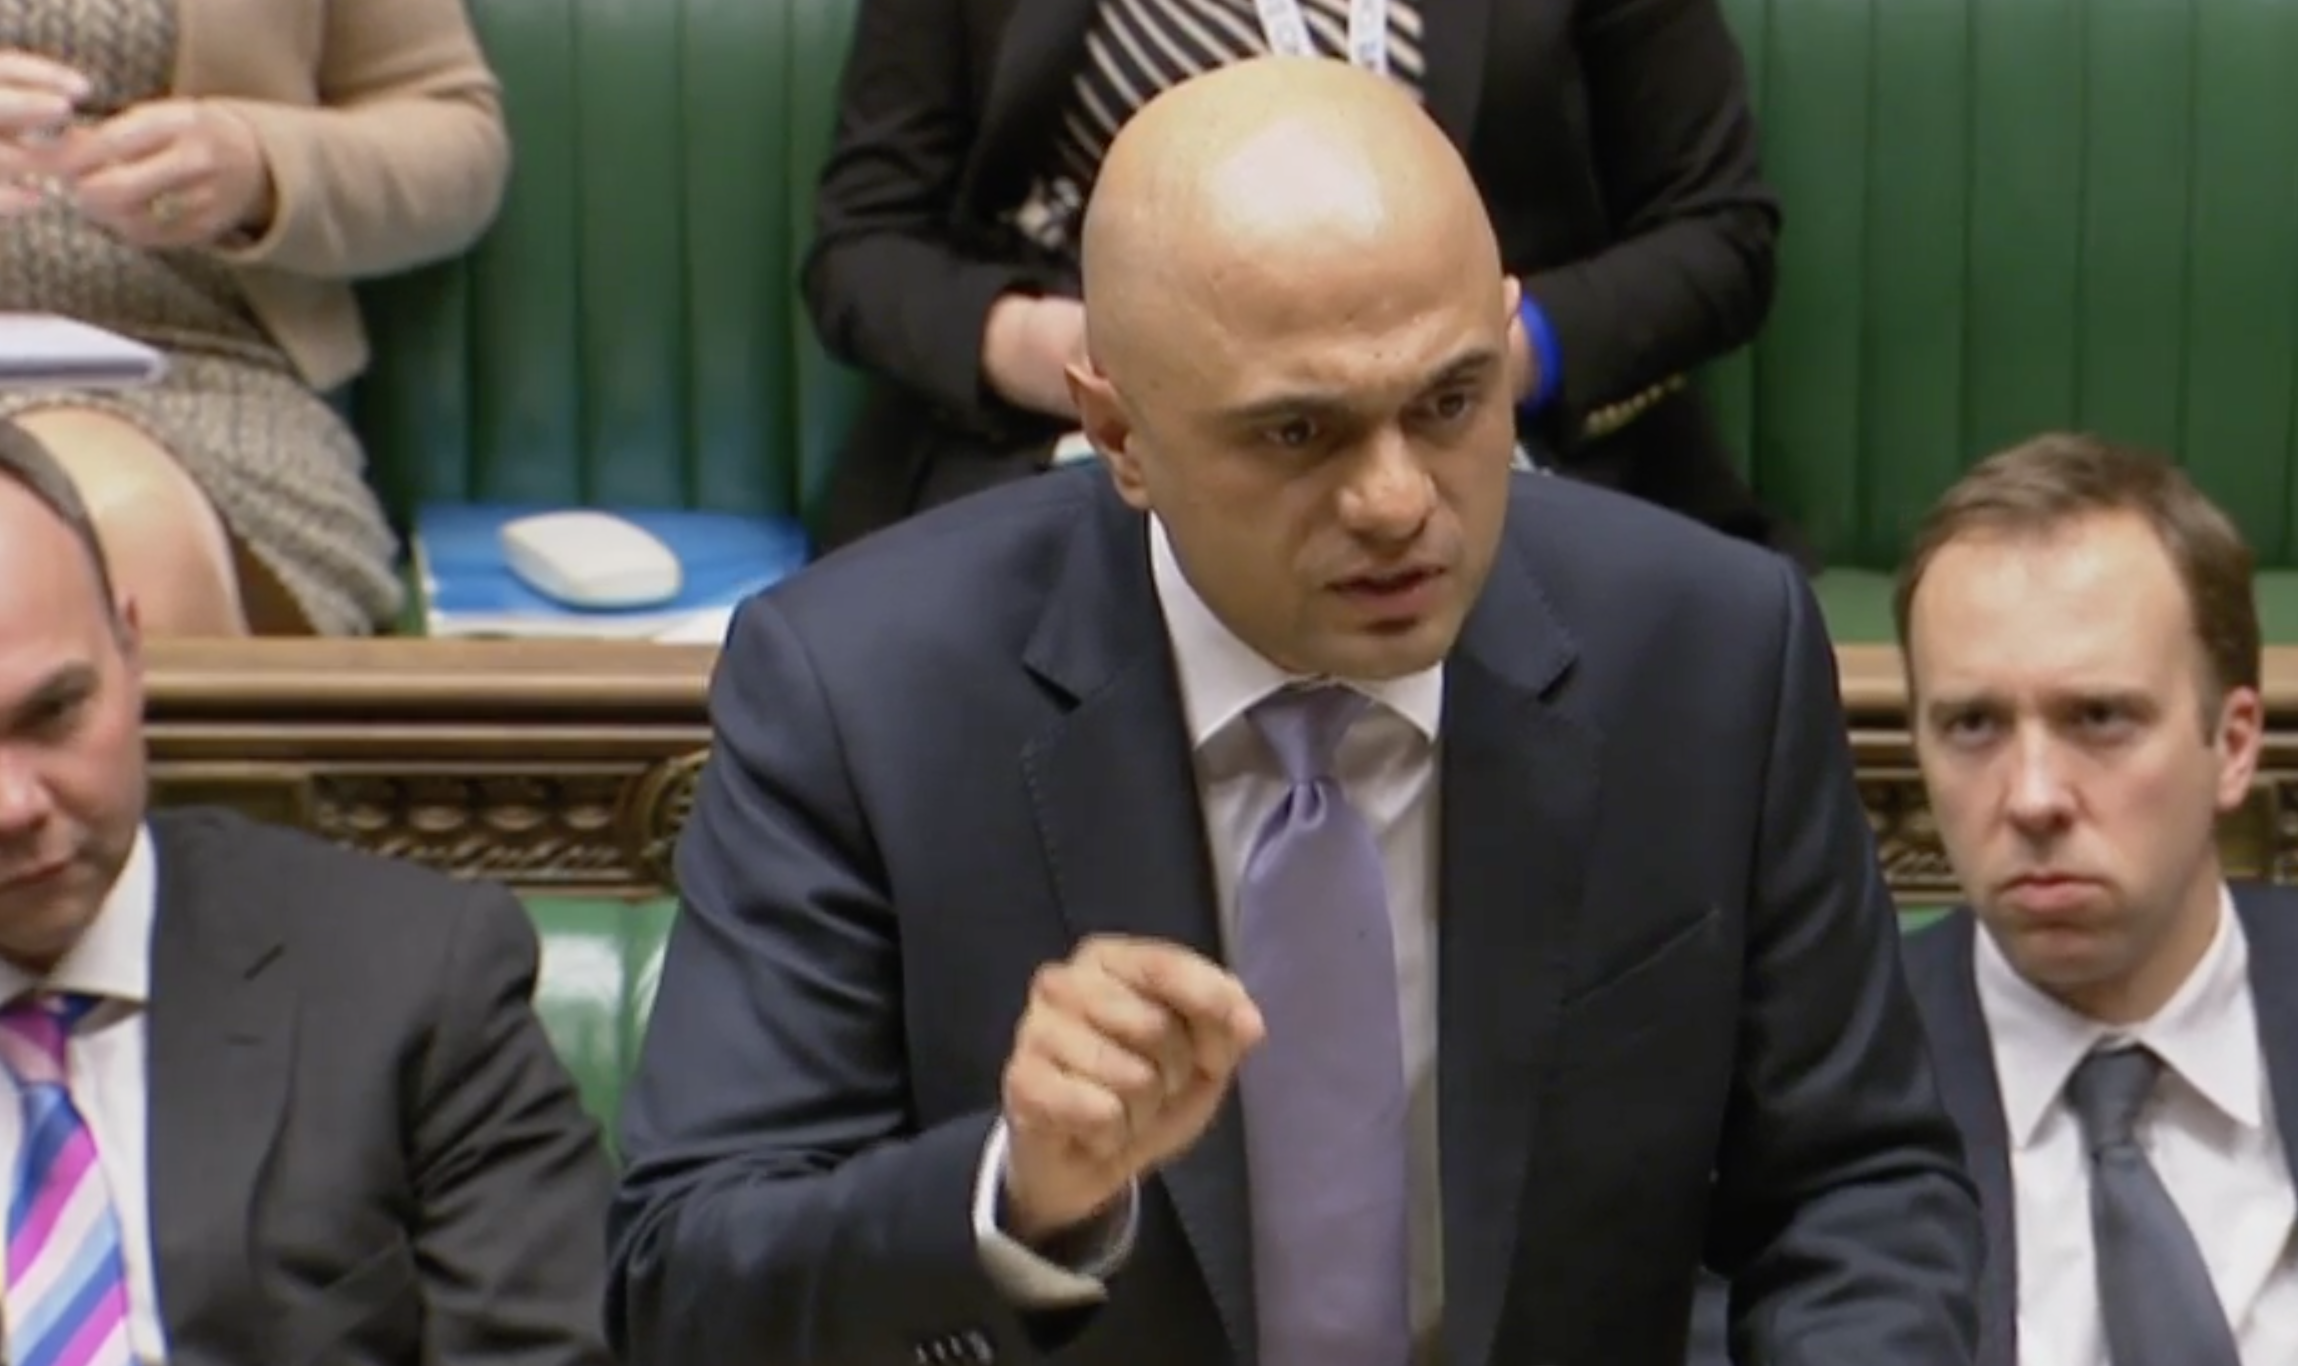 Sajid Javid faces a rebellion from his own party over rising business rates